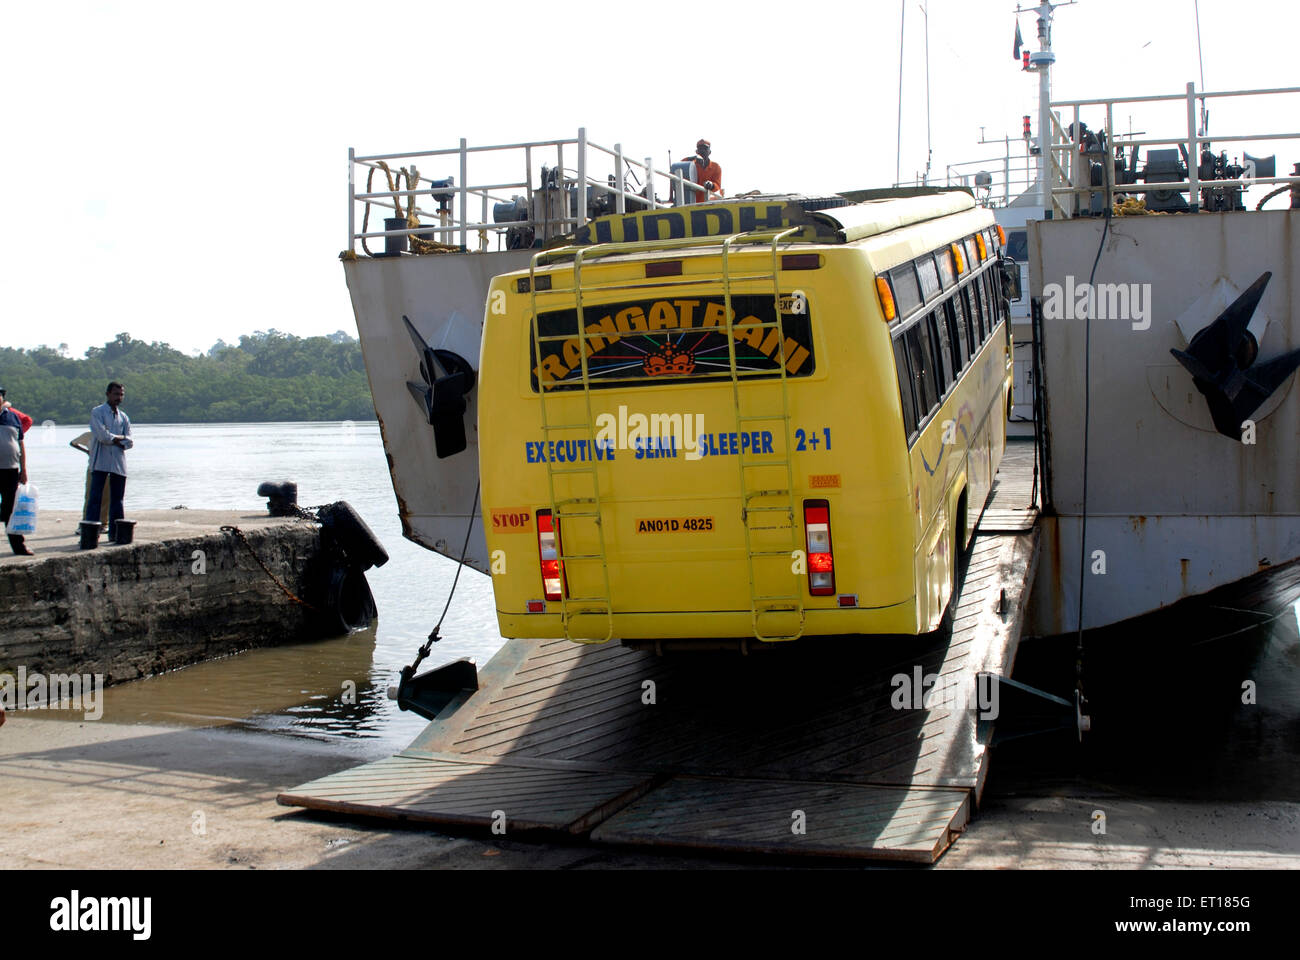 Loading of bus on barge ferryboat Port Blair Andaman and Nicobar Islands Bay of Bengal India - rmm 162137 Stock Photo